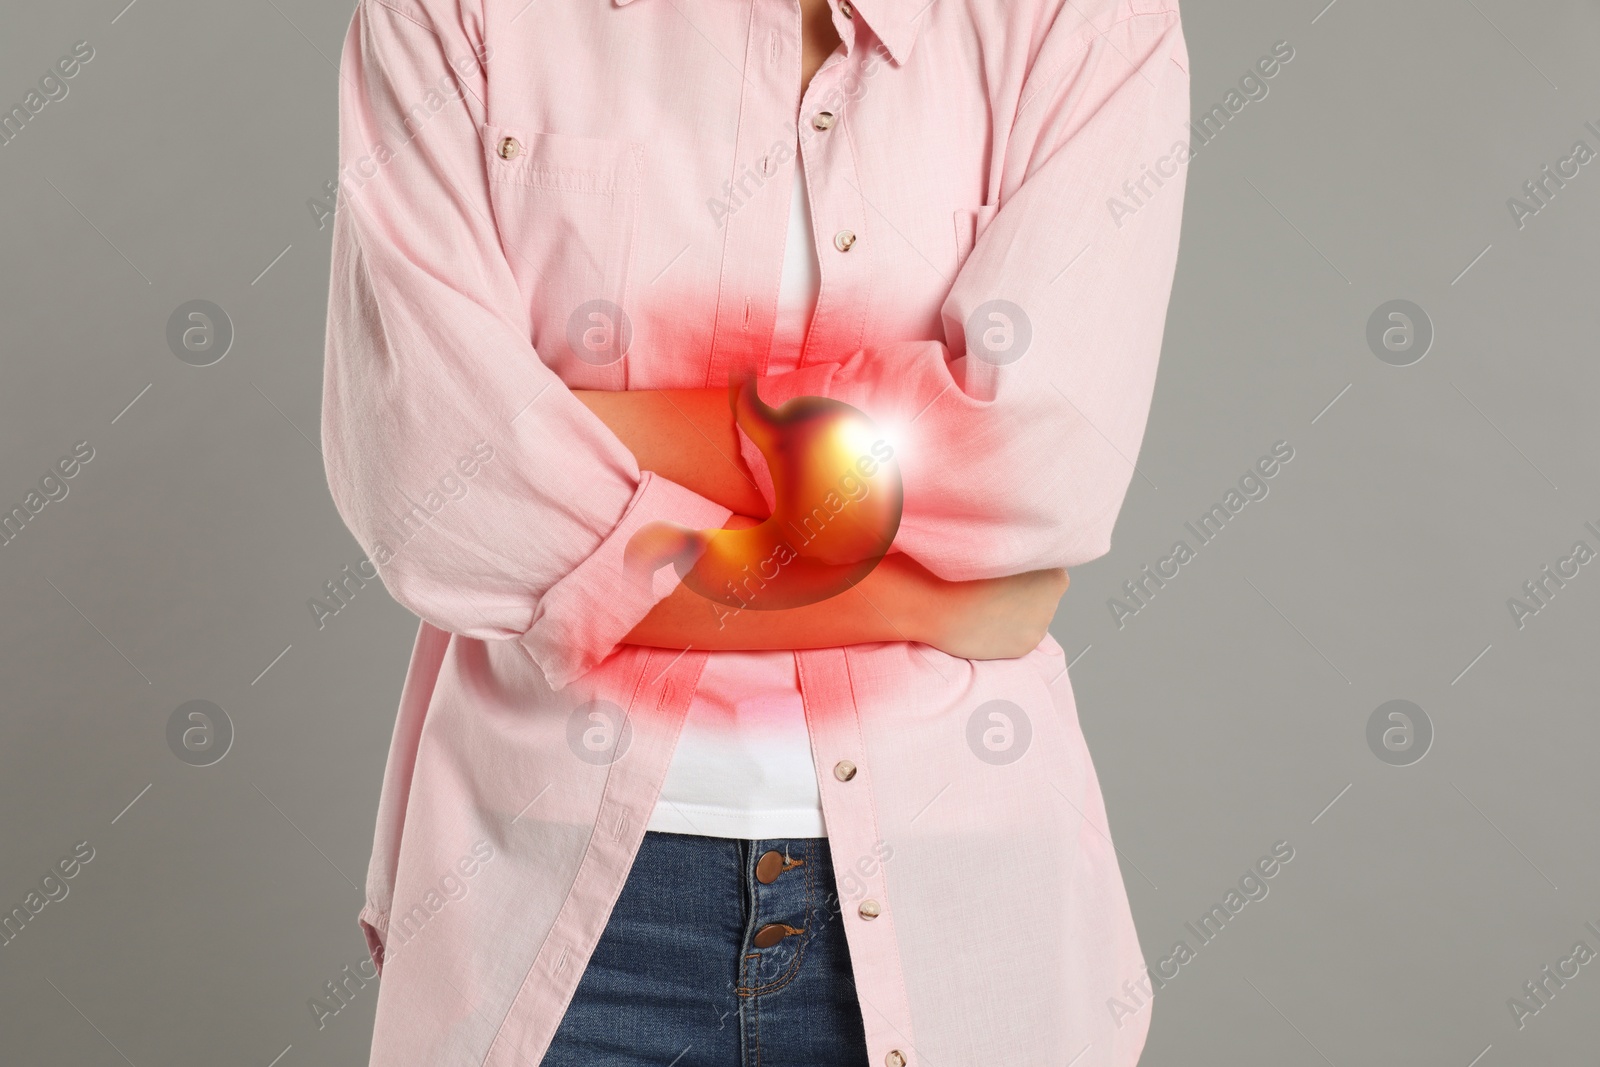 Image of Woman suffering from abdominal pain on grey background, closeup. Illustration of unhealthy stomach